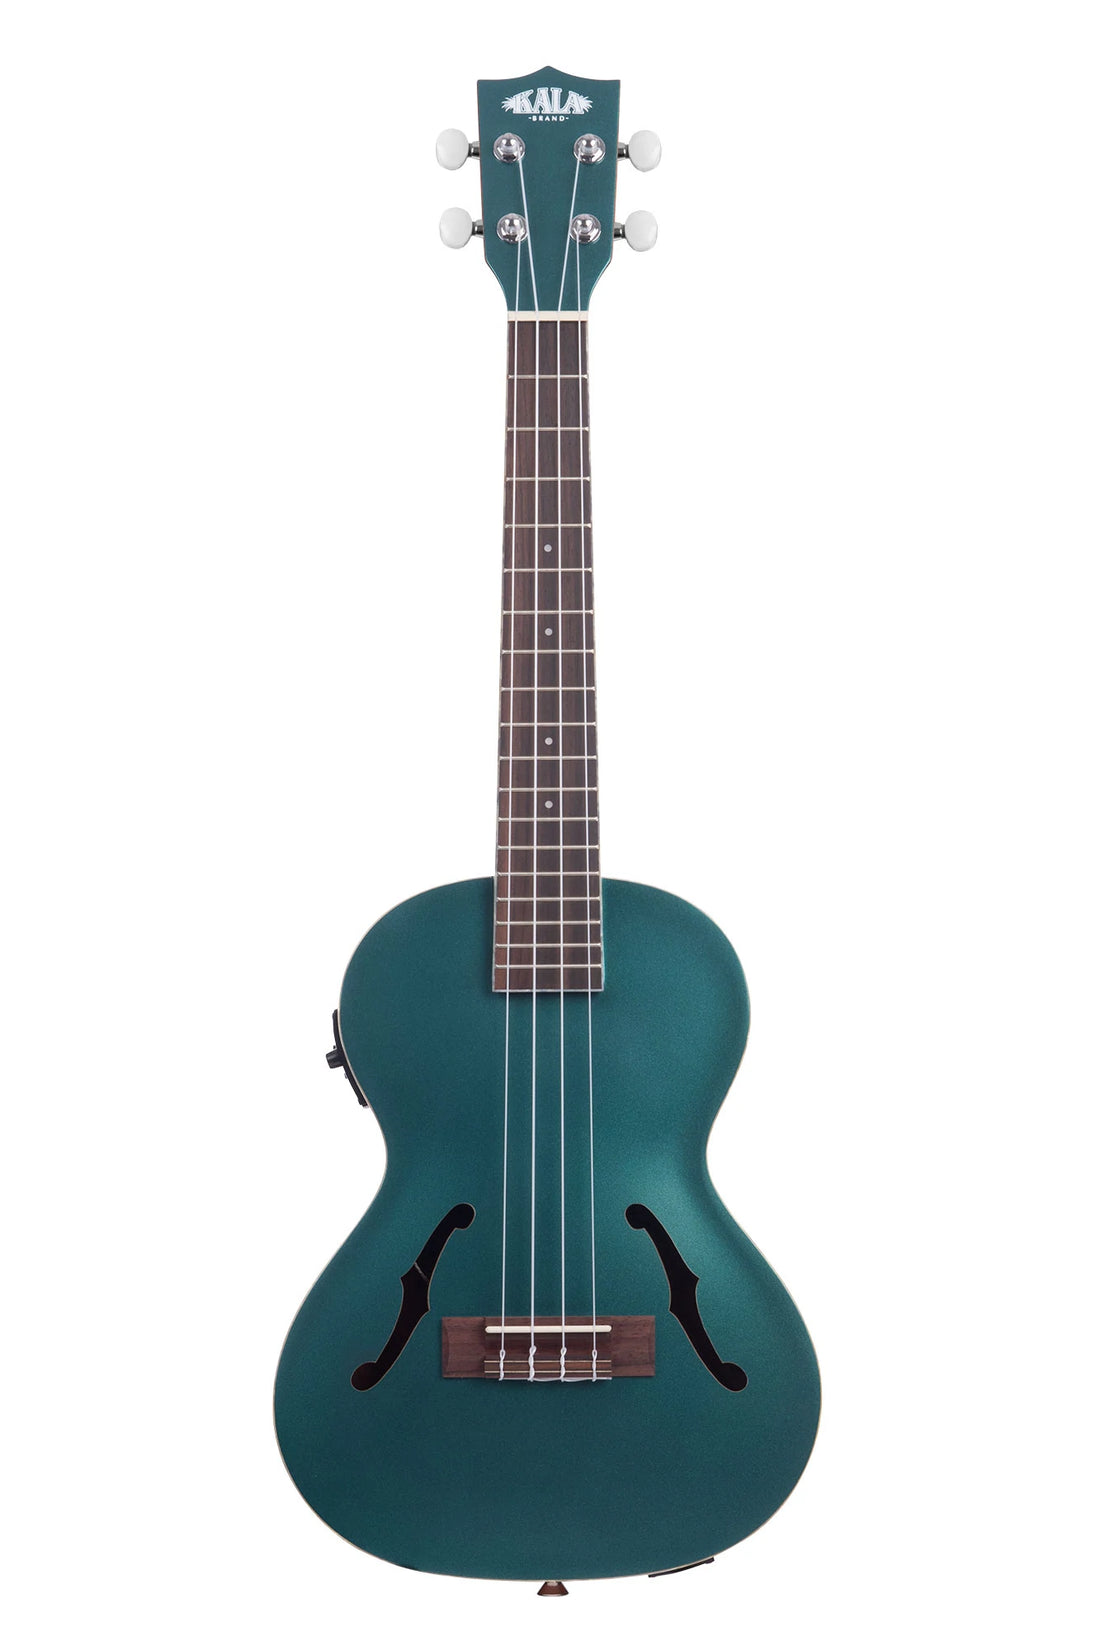 KA-JTE-BKGN Brooklyn Green Jazz Archtop Electric Tenor Bundle $855   Ukulele + Deluxe Hardcase + Private Online Lesson + Free Australia Post Shipping In Australia.  Ukulele Trading Co Australia